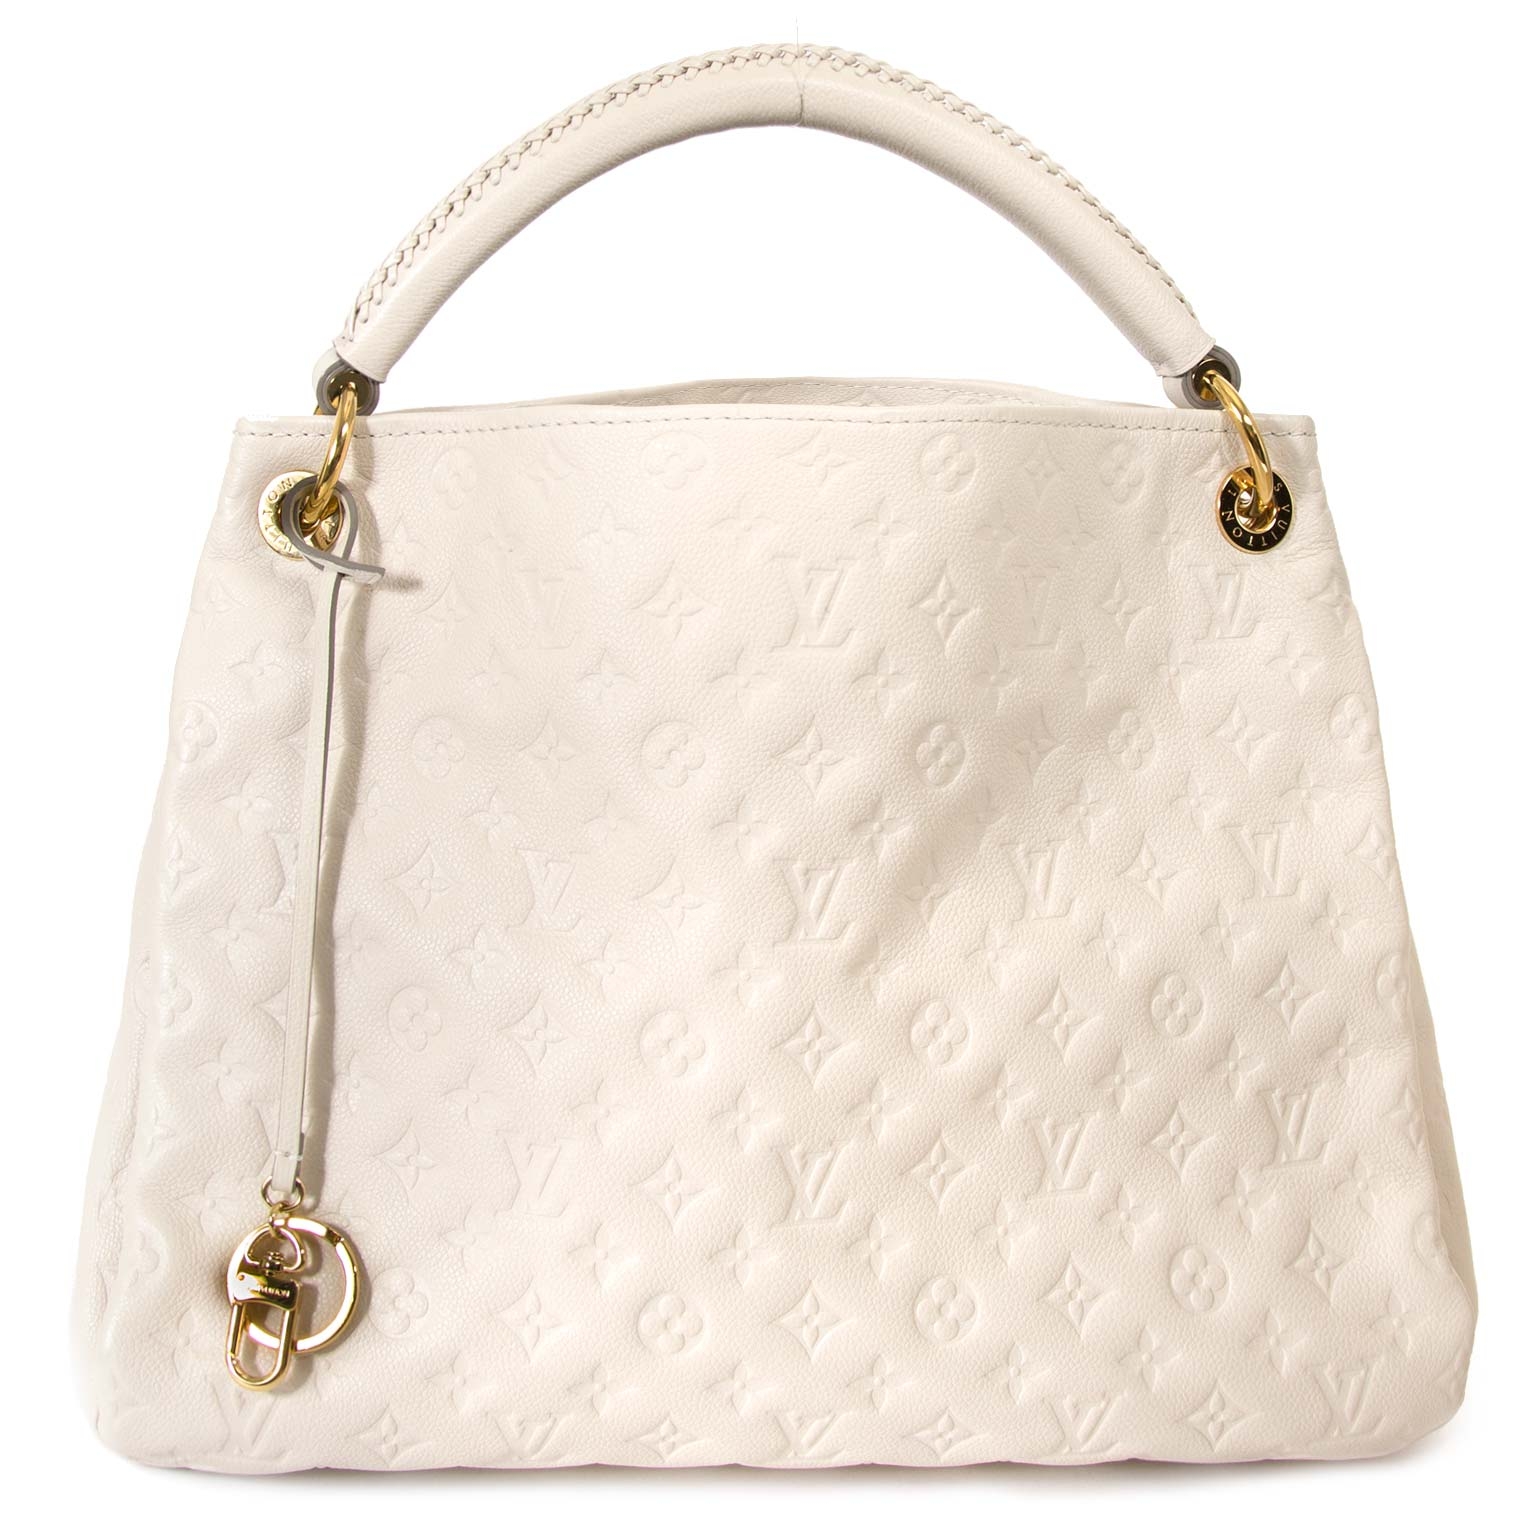 Sold at Auction: Louis Vuitton - Artsy Leather Hobo Bag - Cream